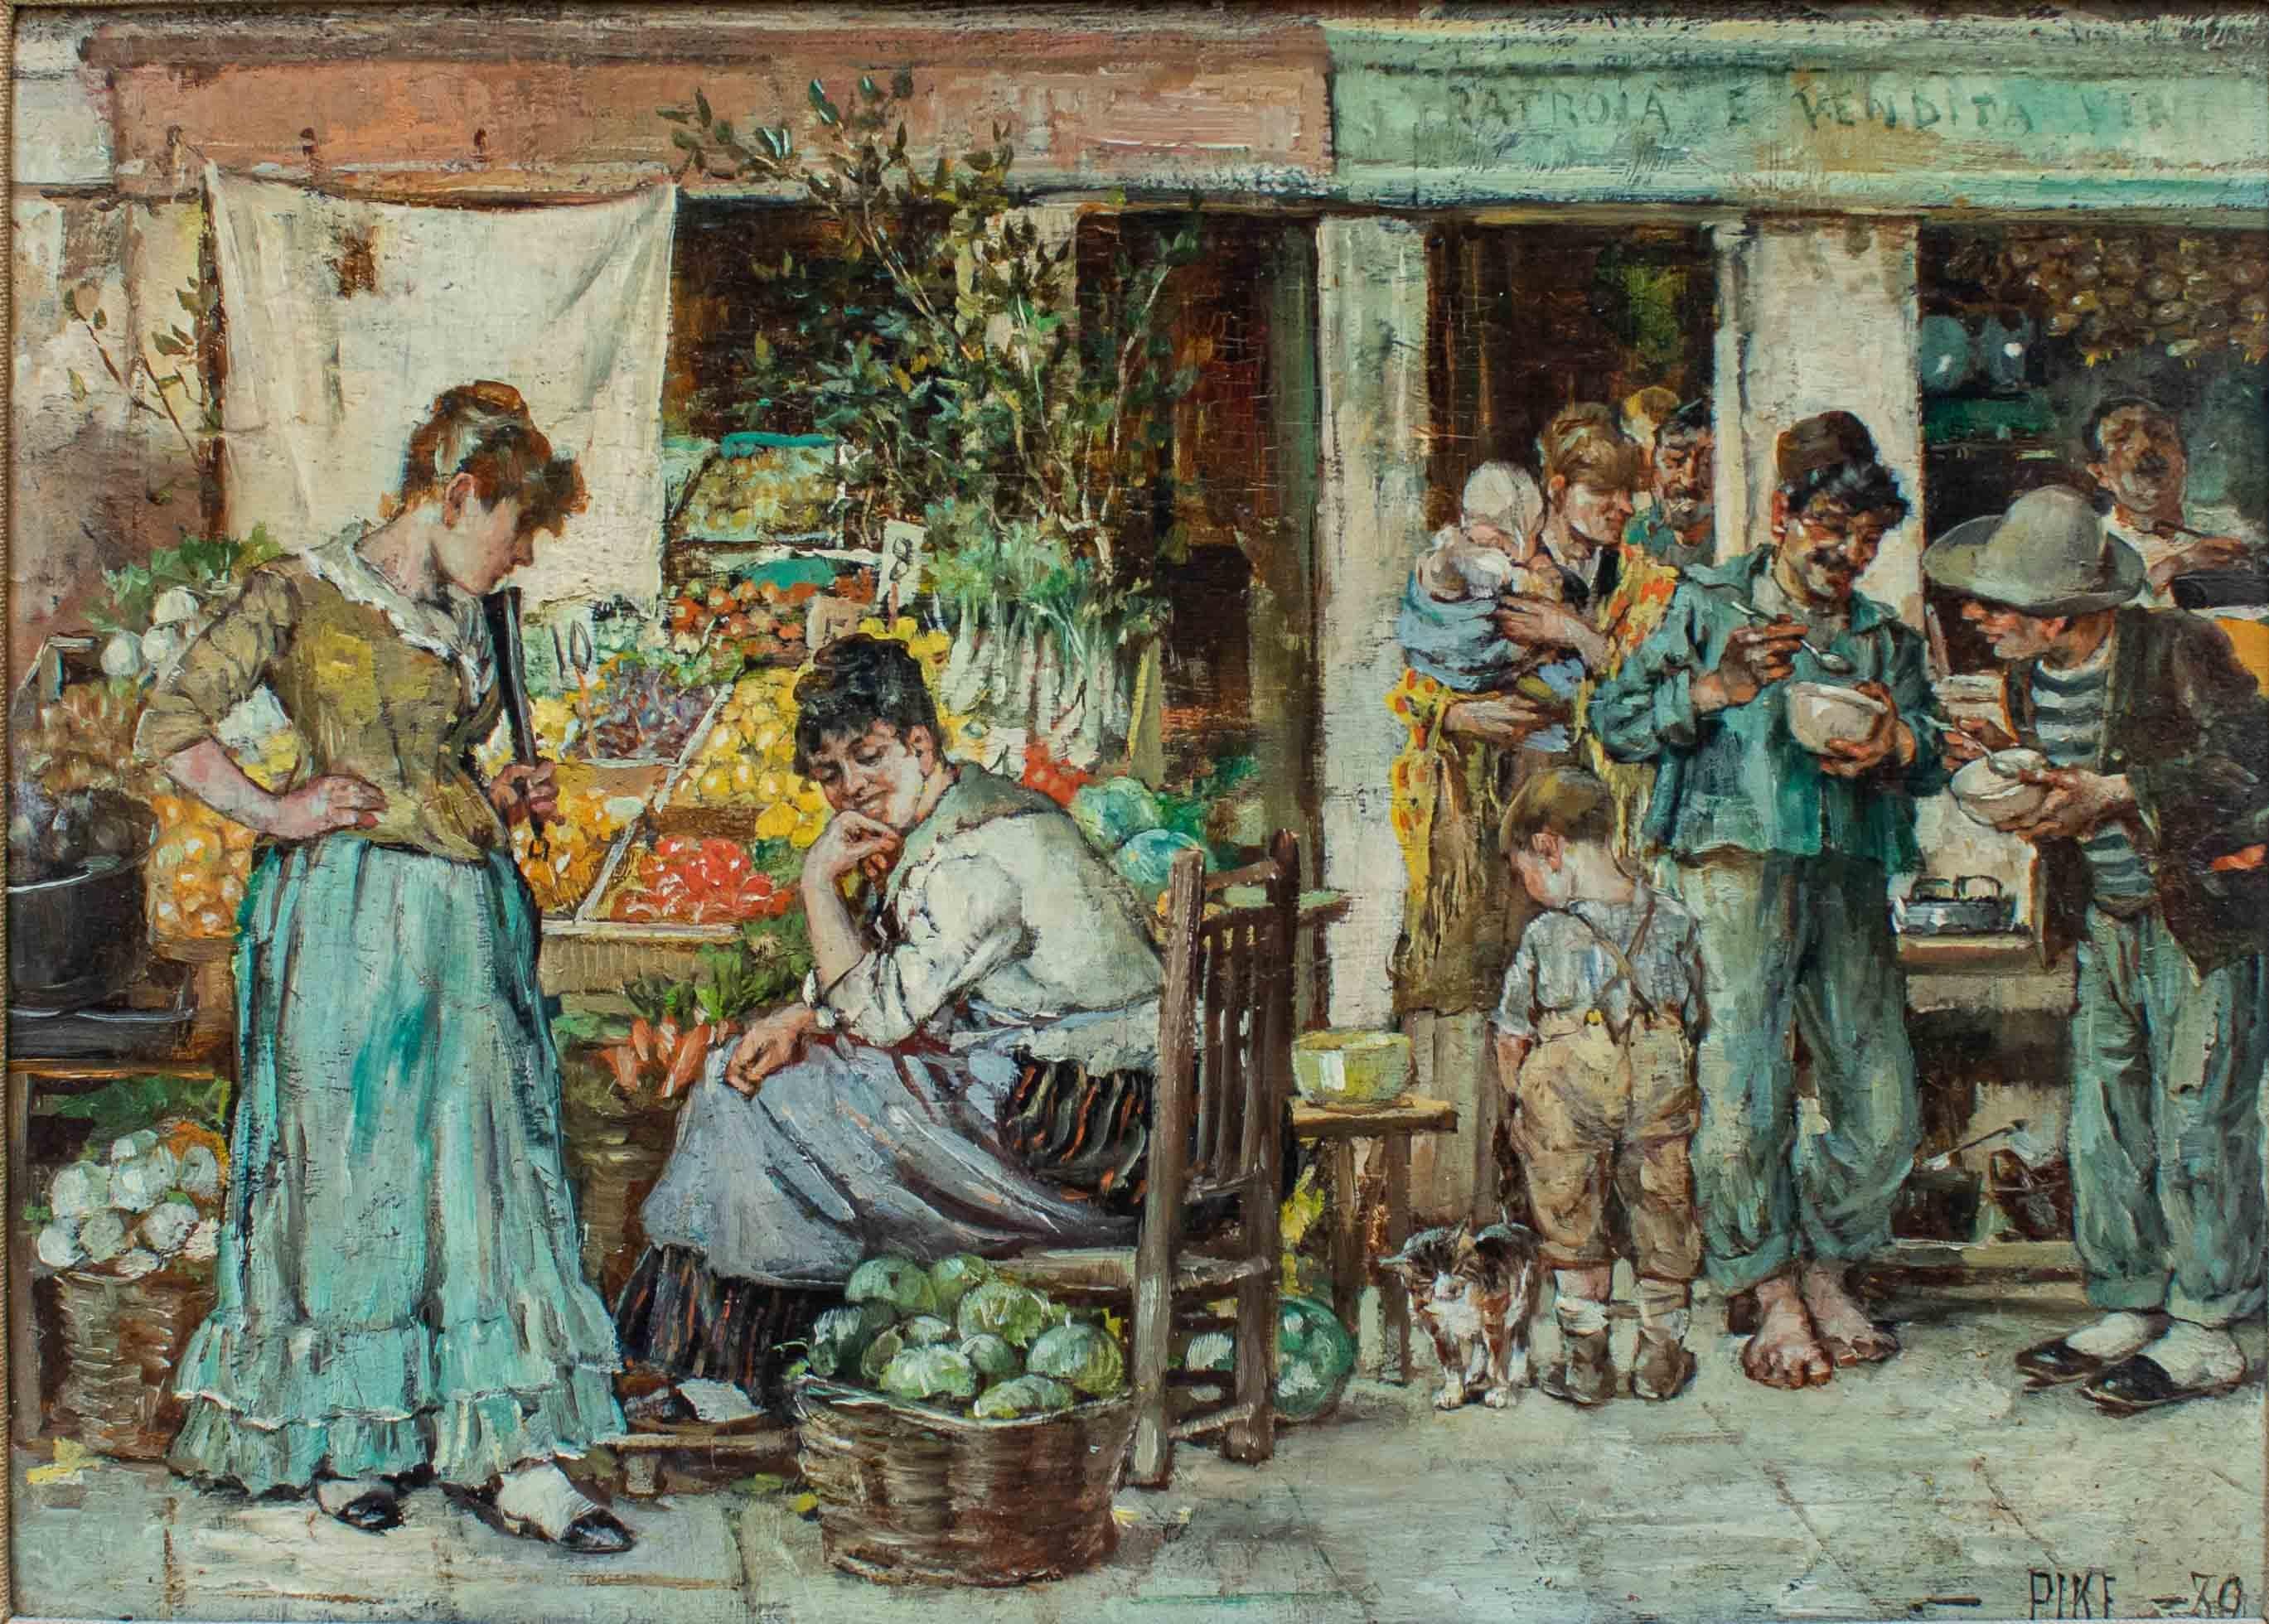 Oiled 19th Century Market Scene Painting William Henry Pike Oil on Panel